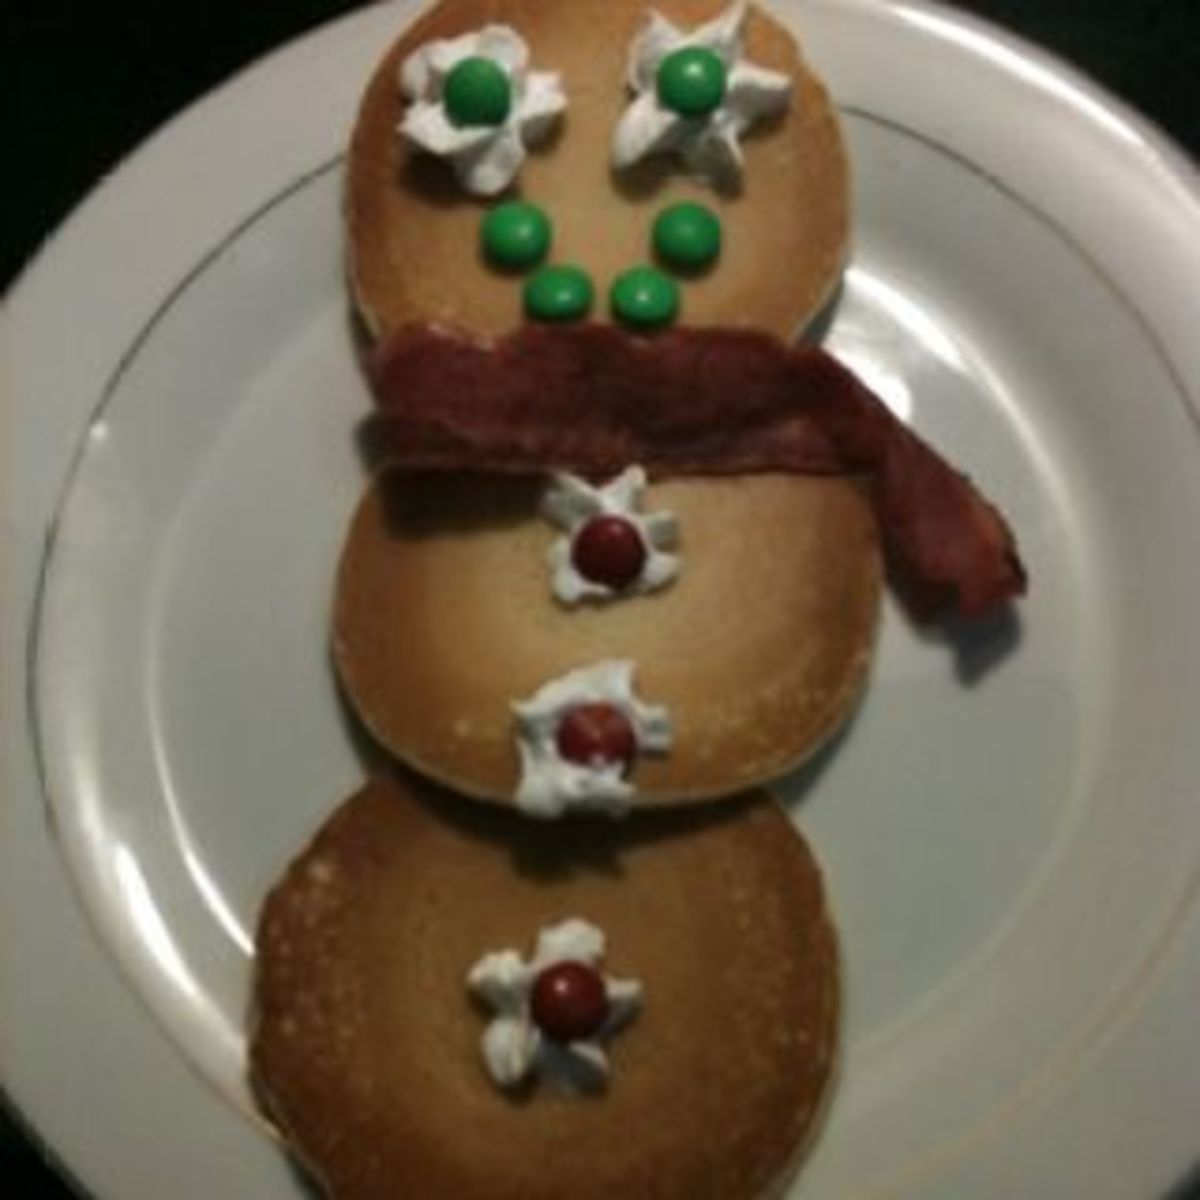 Snowman pancakes with bacon scarf